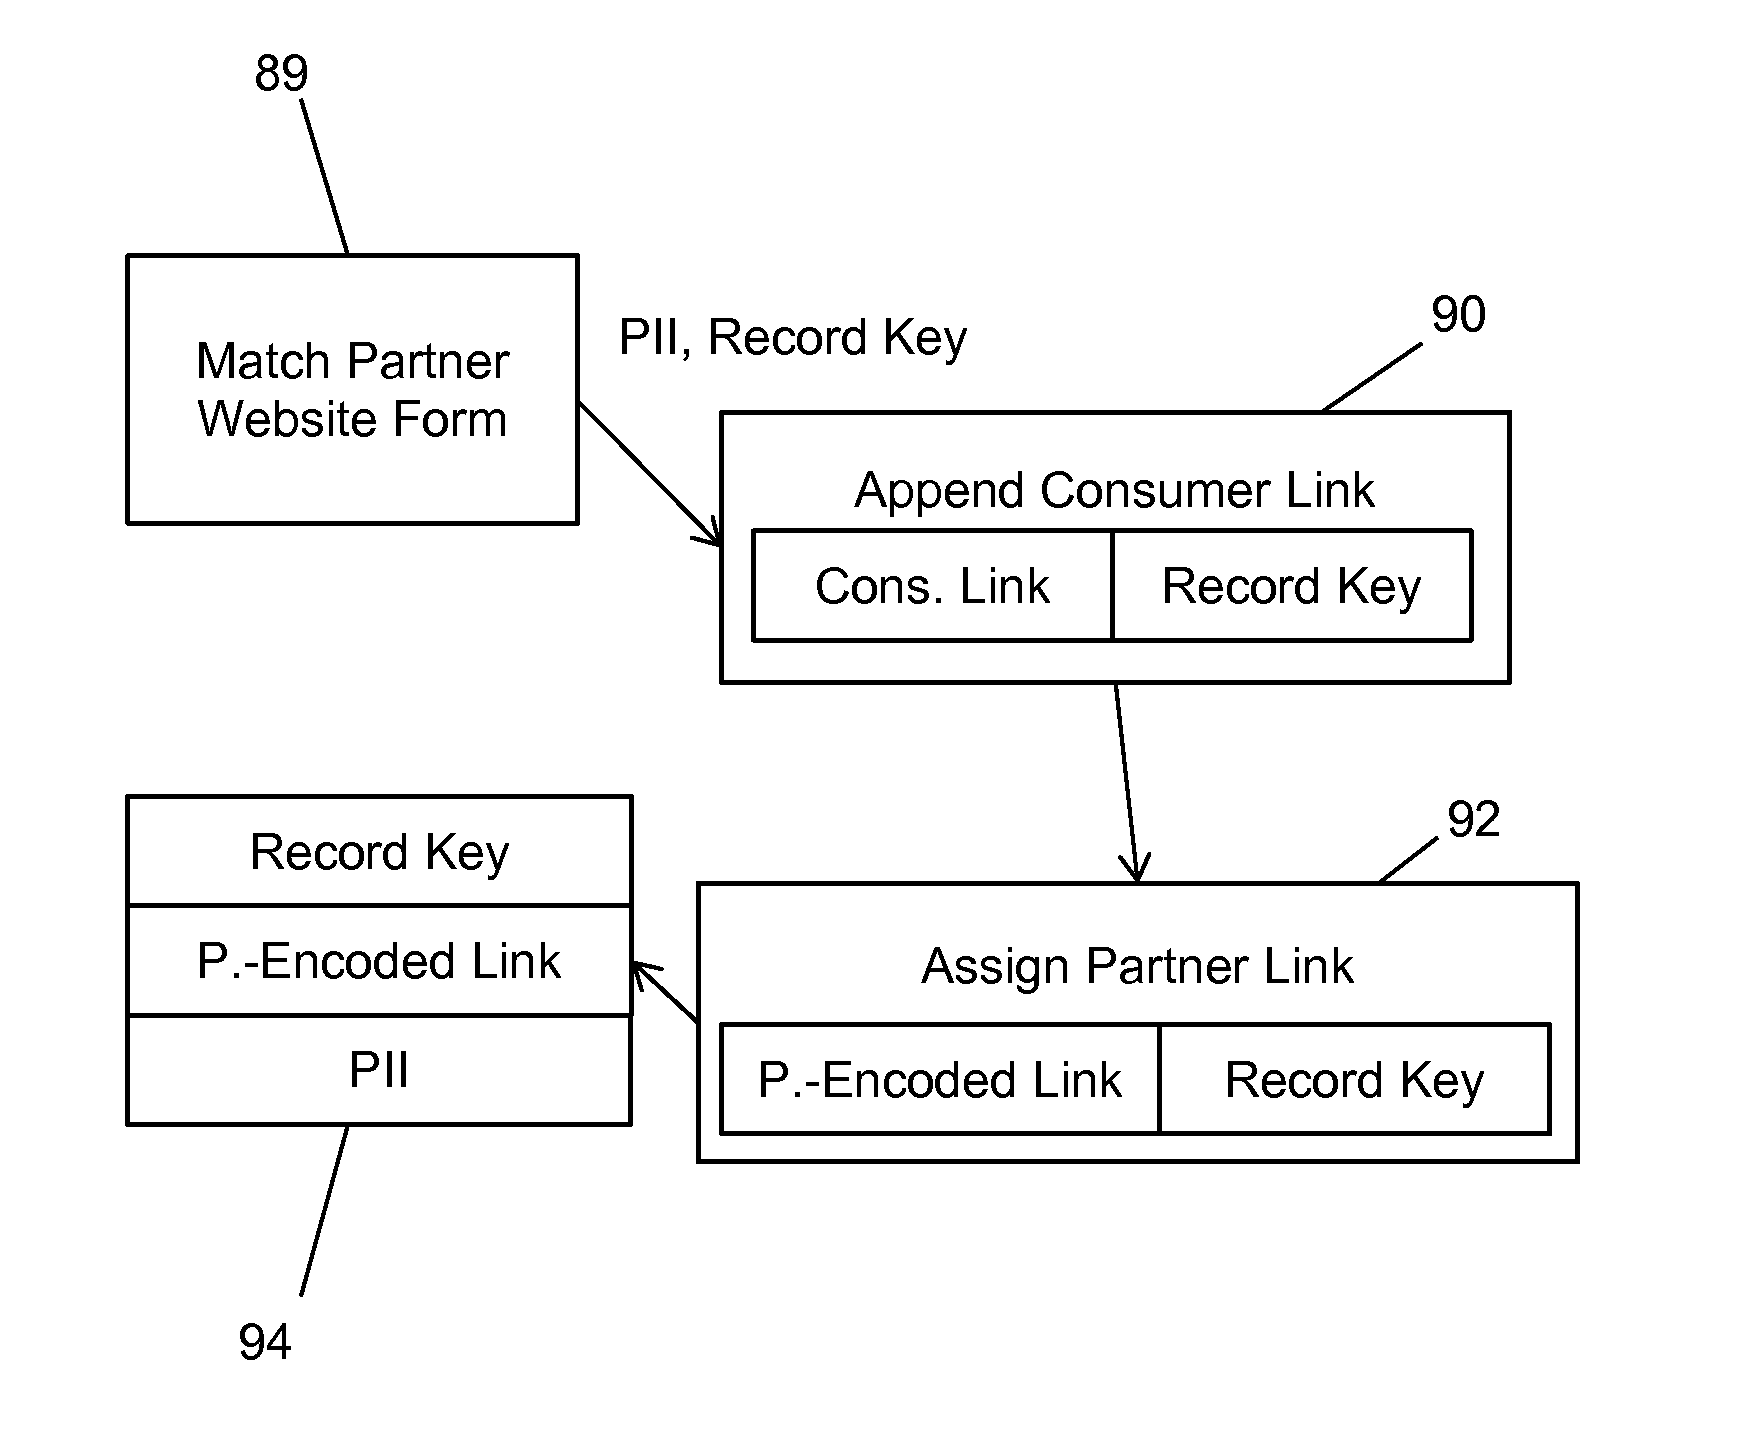 Apparatus and Method for Bringing Offline Data Online While Protecting Consumer Privacy